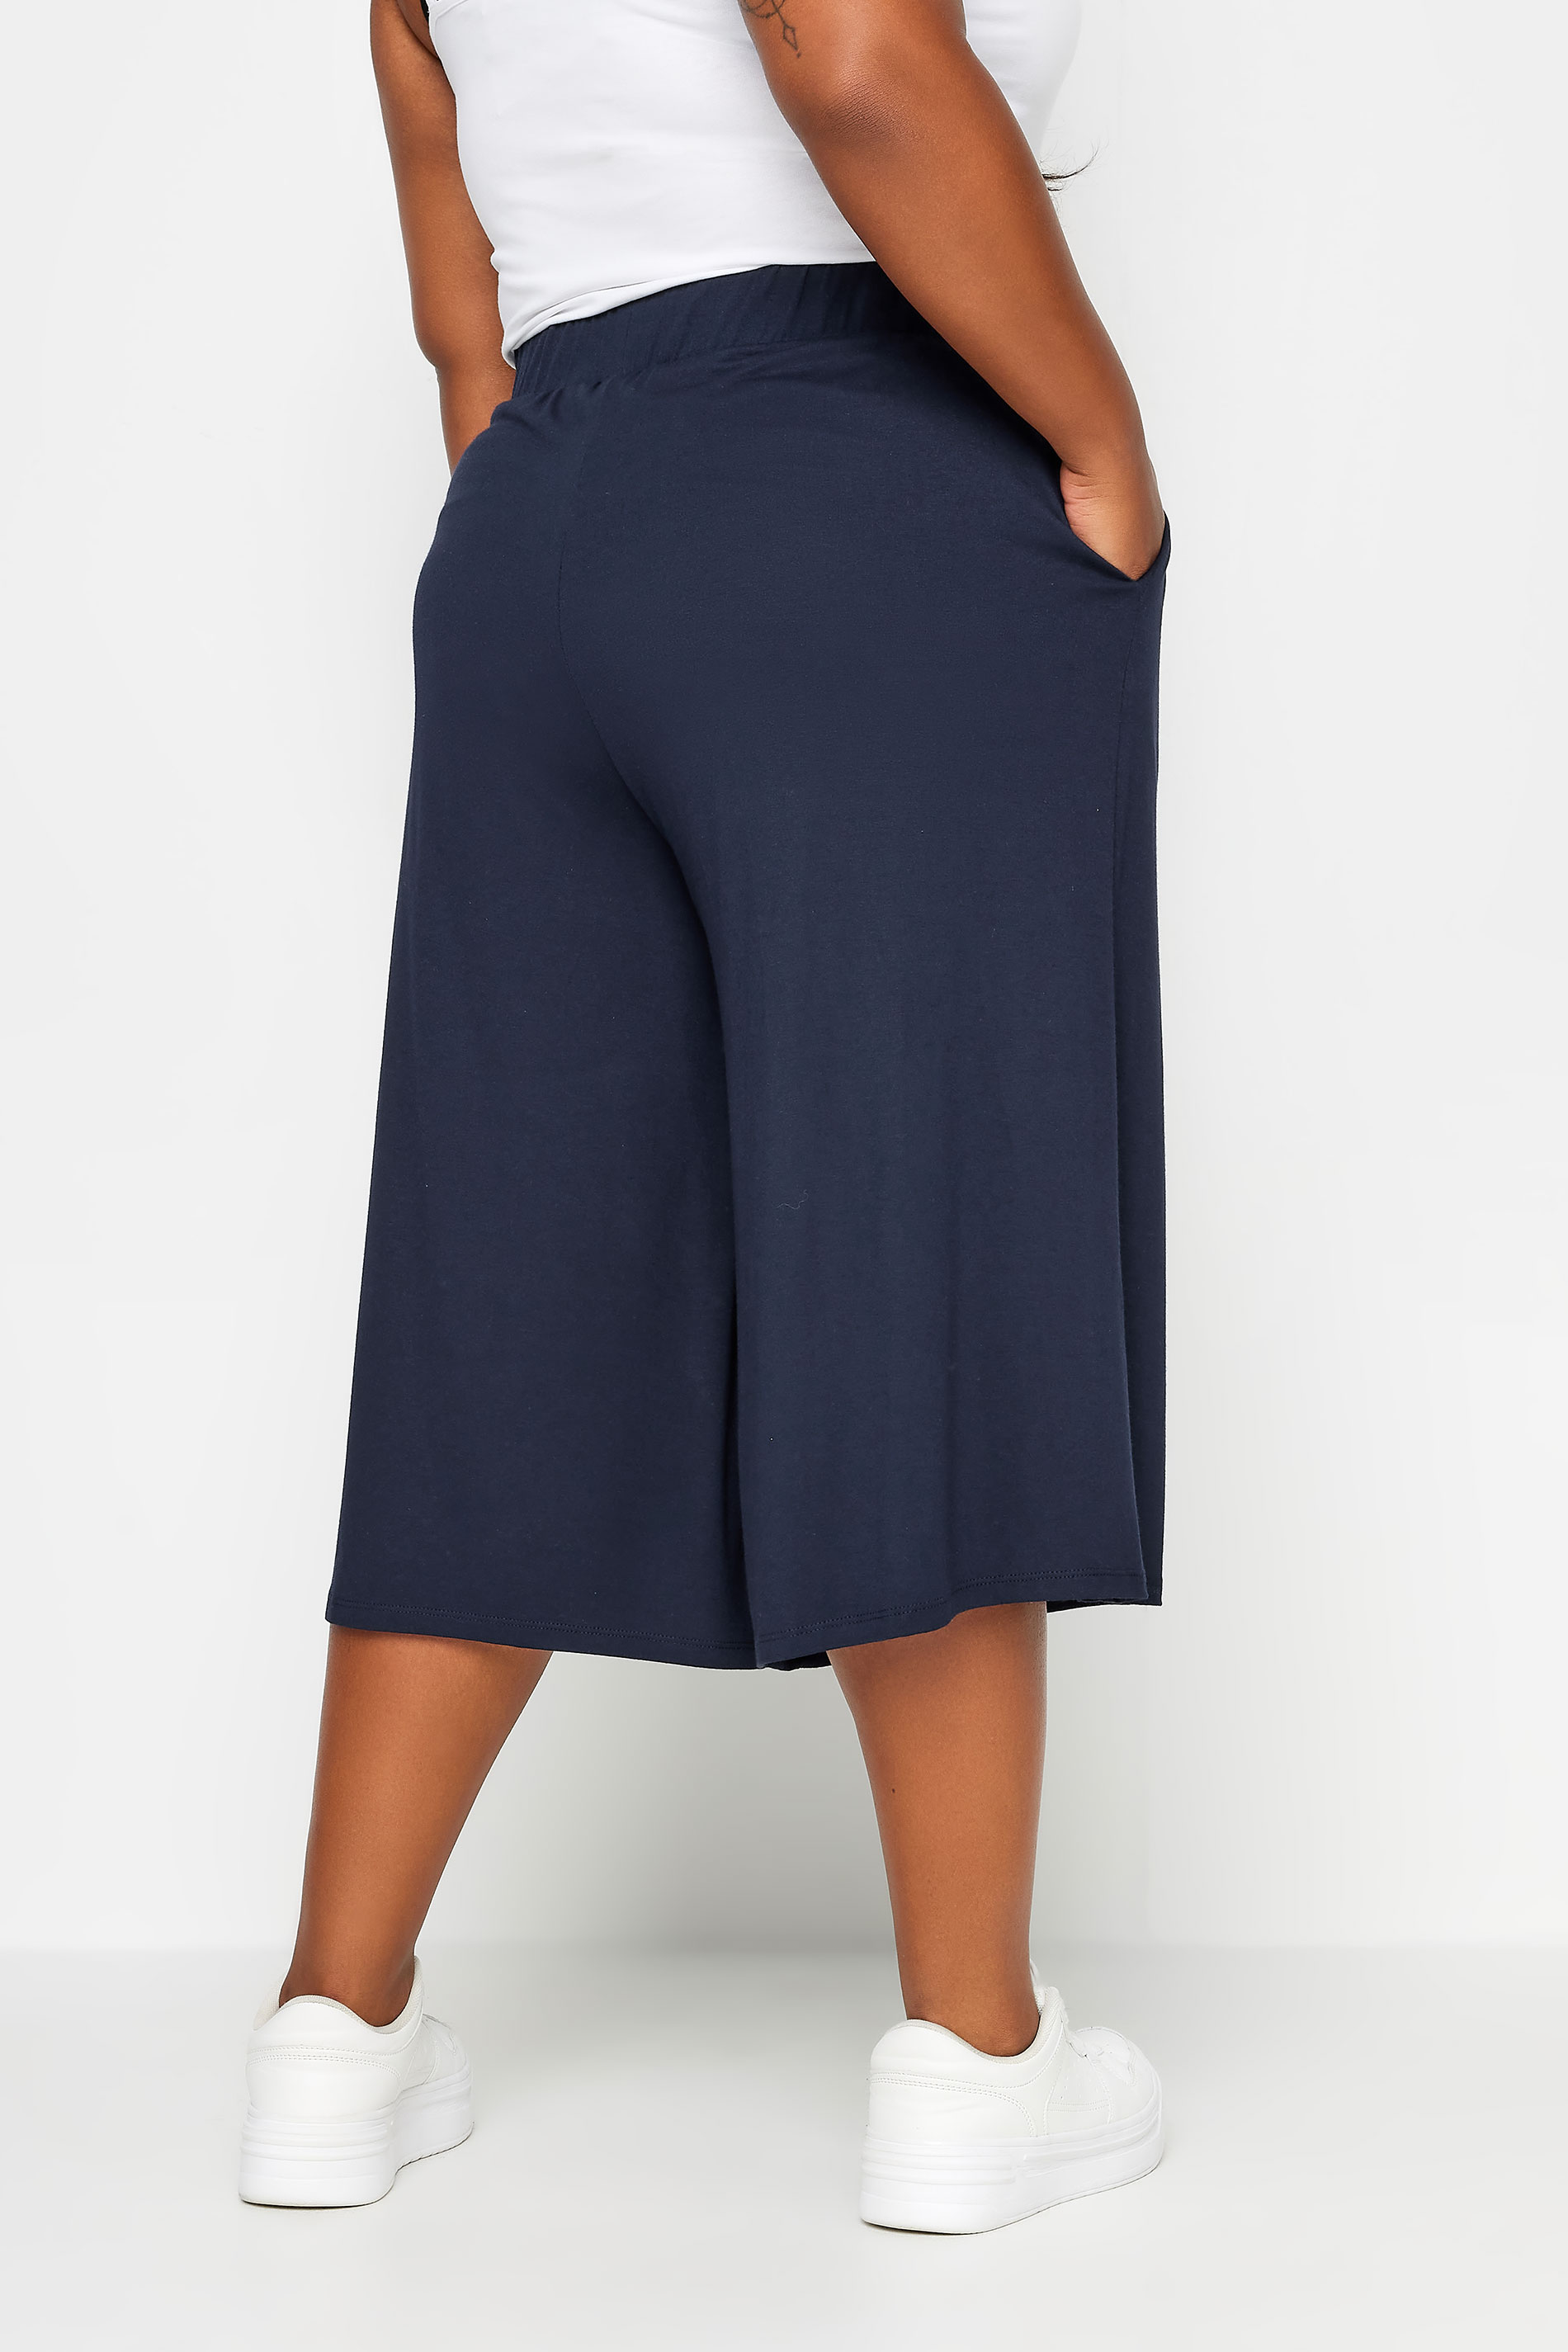 YOURS Plus Size Navy Blue Culottes | Yours Clothing 3